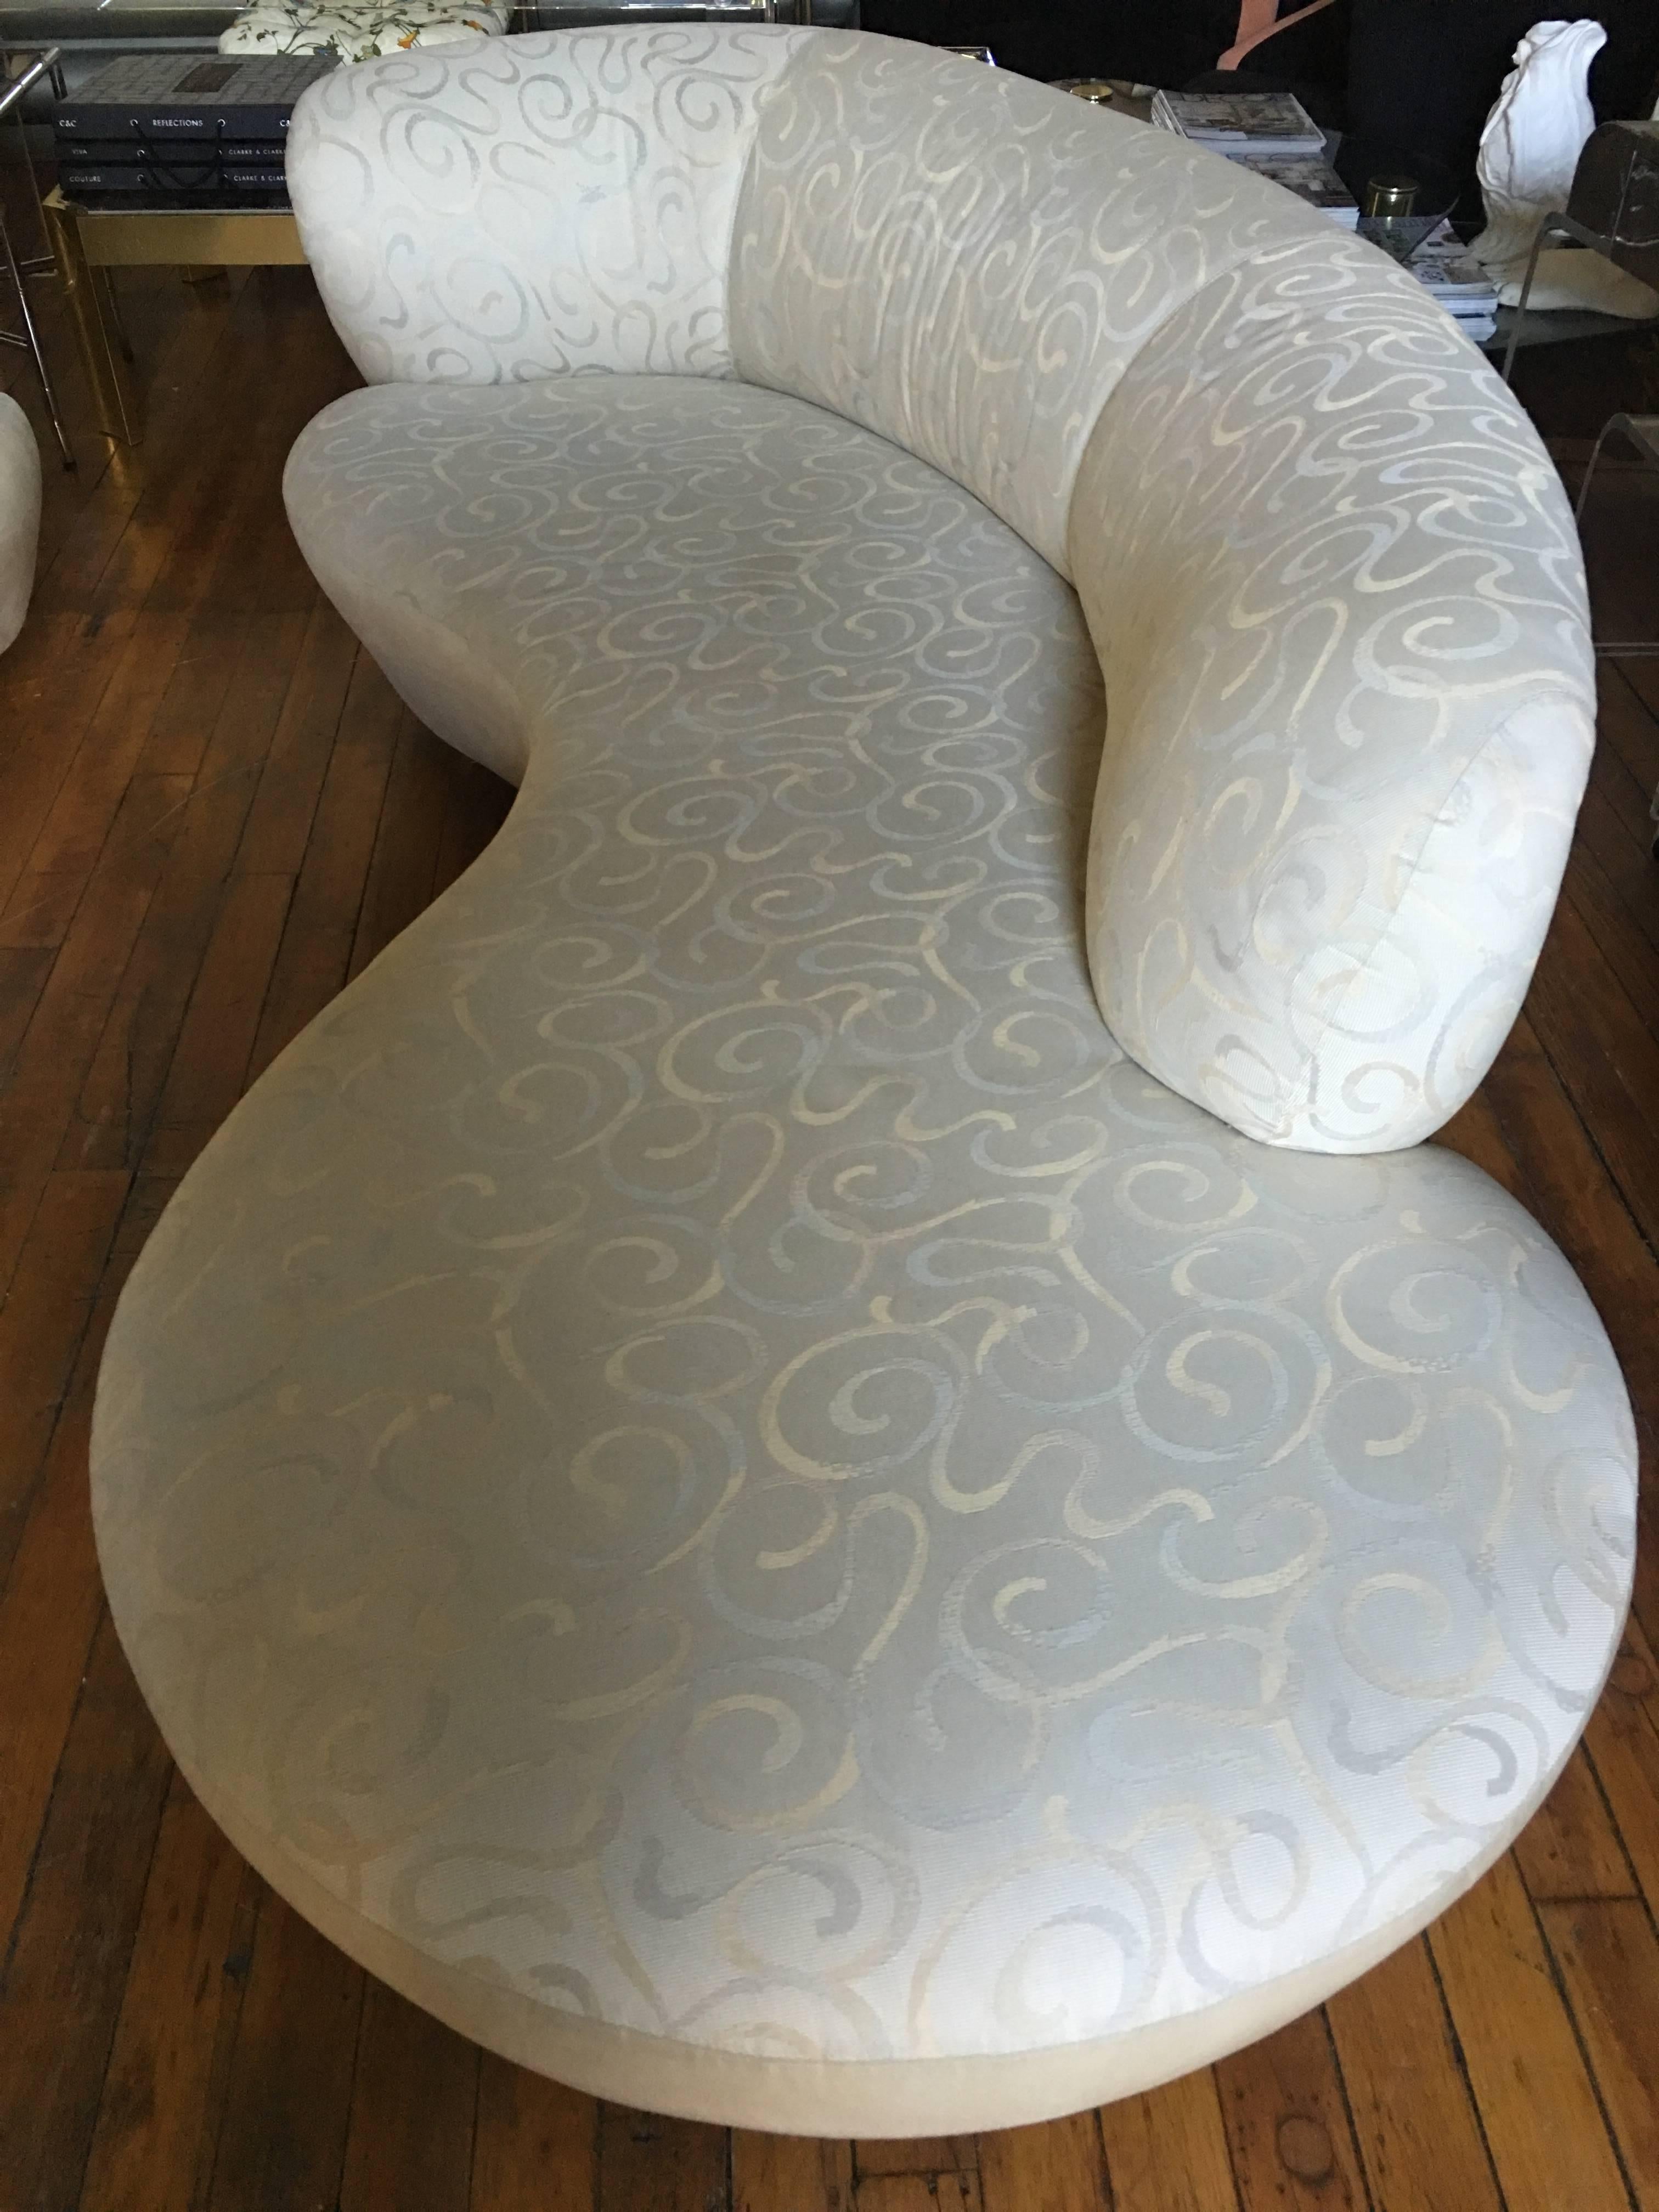 Sculptural Mid-Century Modern free-form cloud curved sofa, Weiman/Preview  in the style of Vladimir Kagan. Original upholstery featuring neutral cream ultra-suede back and front with patterned fabric seat and seat back. Original upholstery tag.